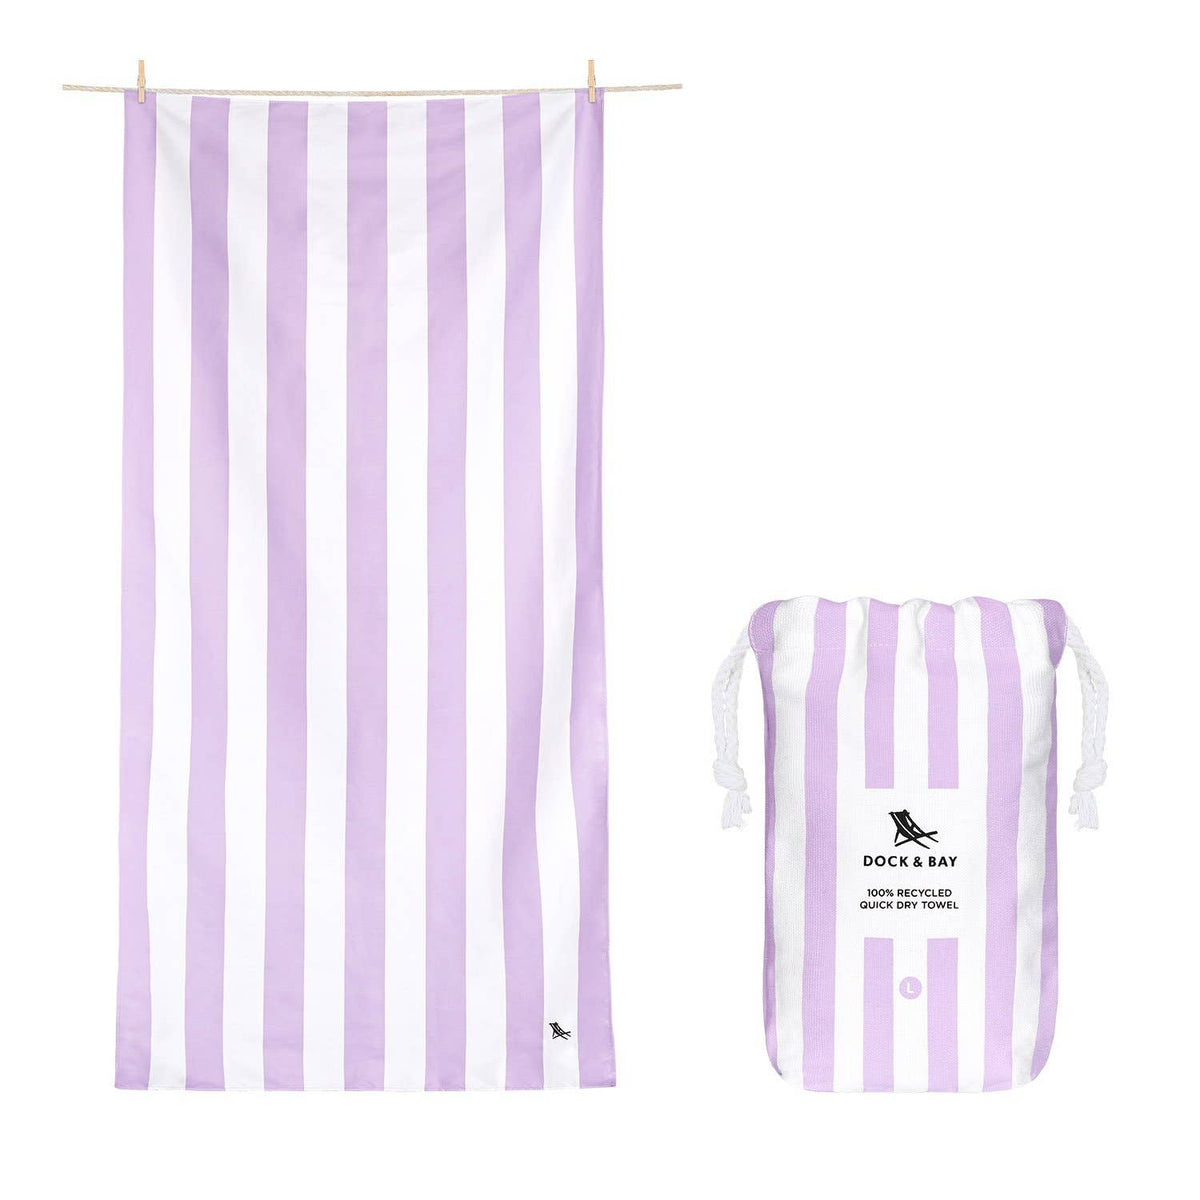 Cabana Stripe in Lombok Lilac Beach Towel - 2 sizes available - The Preppy Bunny